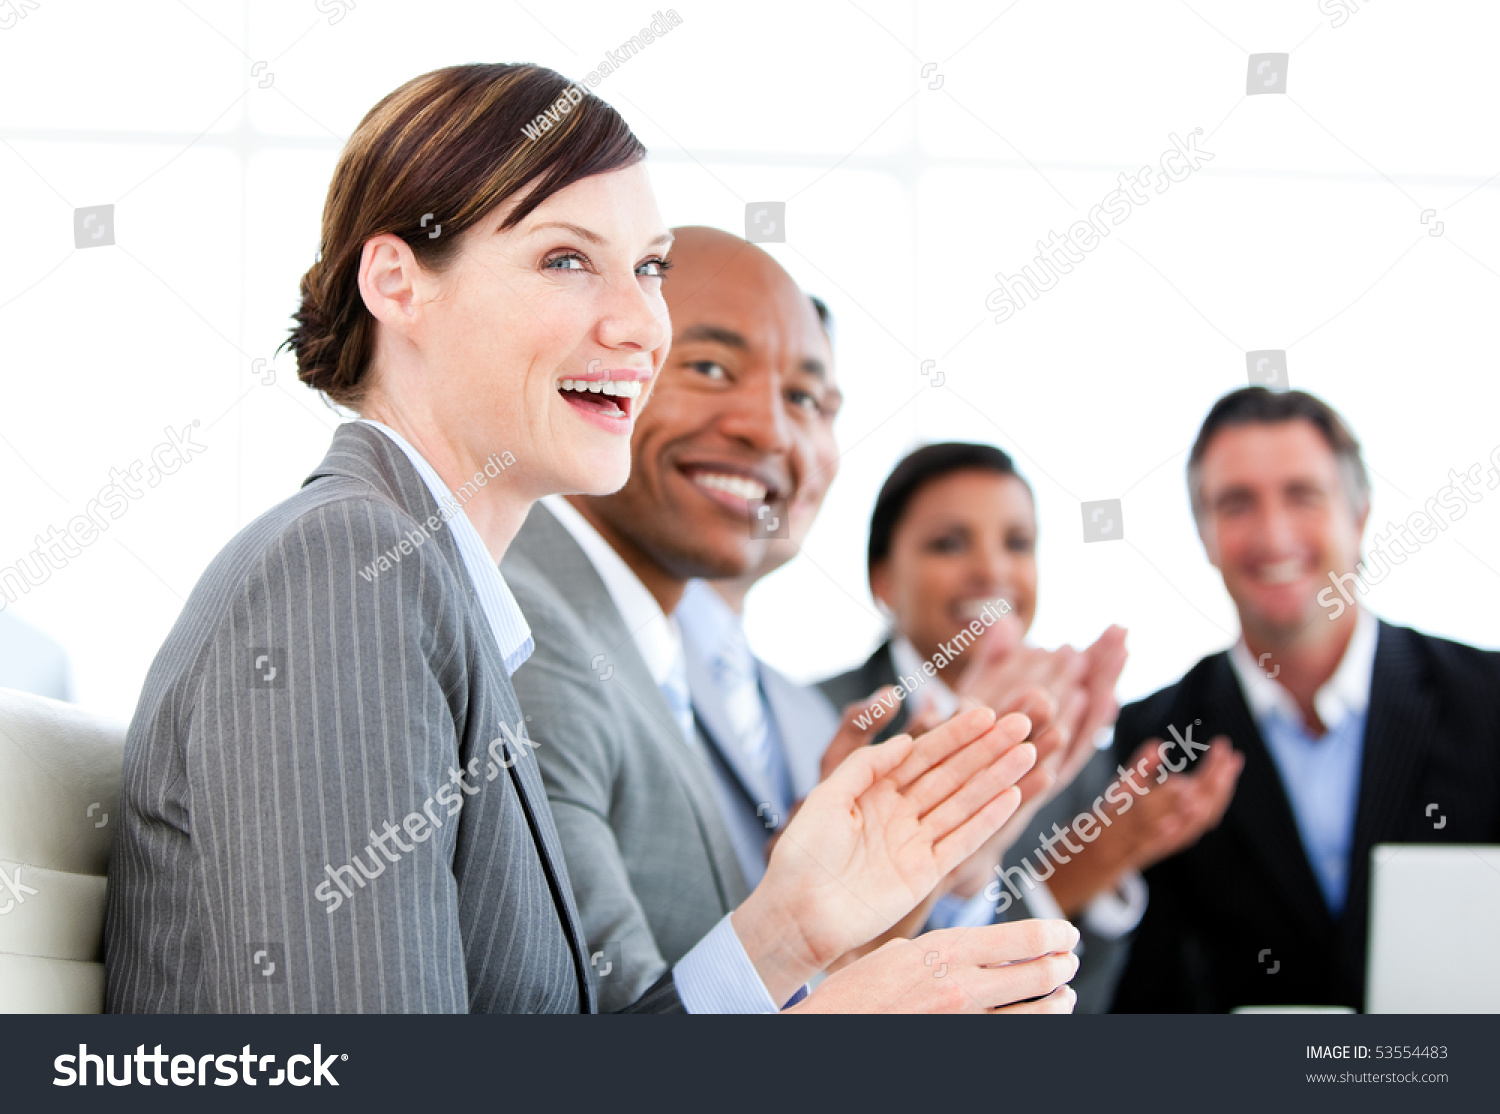 Portrait of smiling businessteam applauding a presentation against a white background #53554483